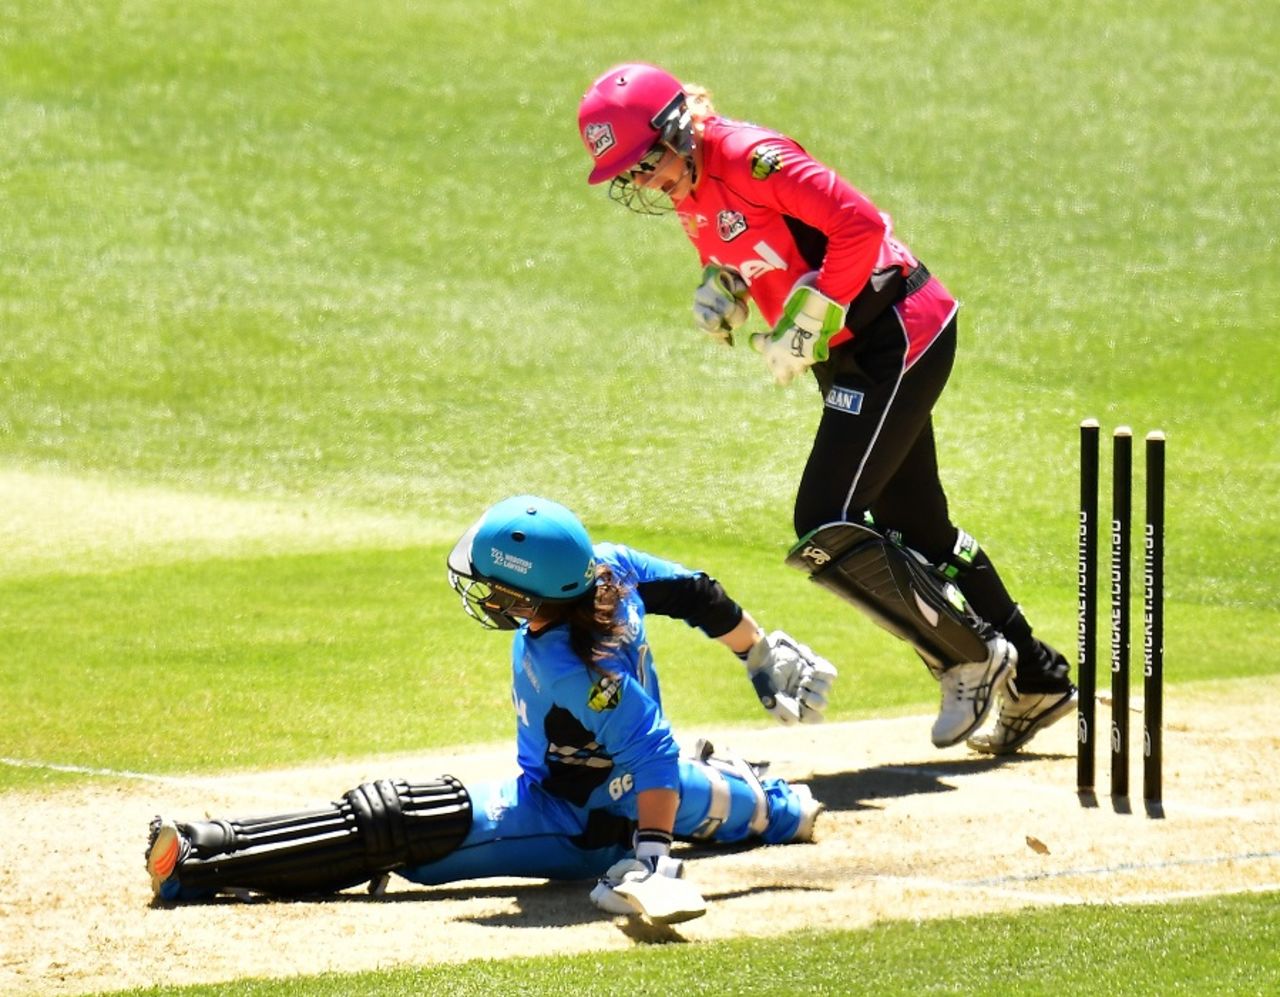 Despite some impressive acrobatics, Tammy Beaumont was stumped by Alyssa Healy, Adelaide Strikers v Sydney Sixers, Women's Big Bash League 2016-17, Adelaide, January 3, 2017